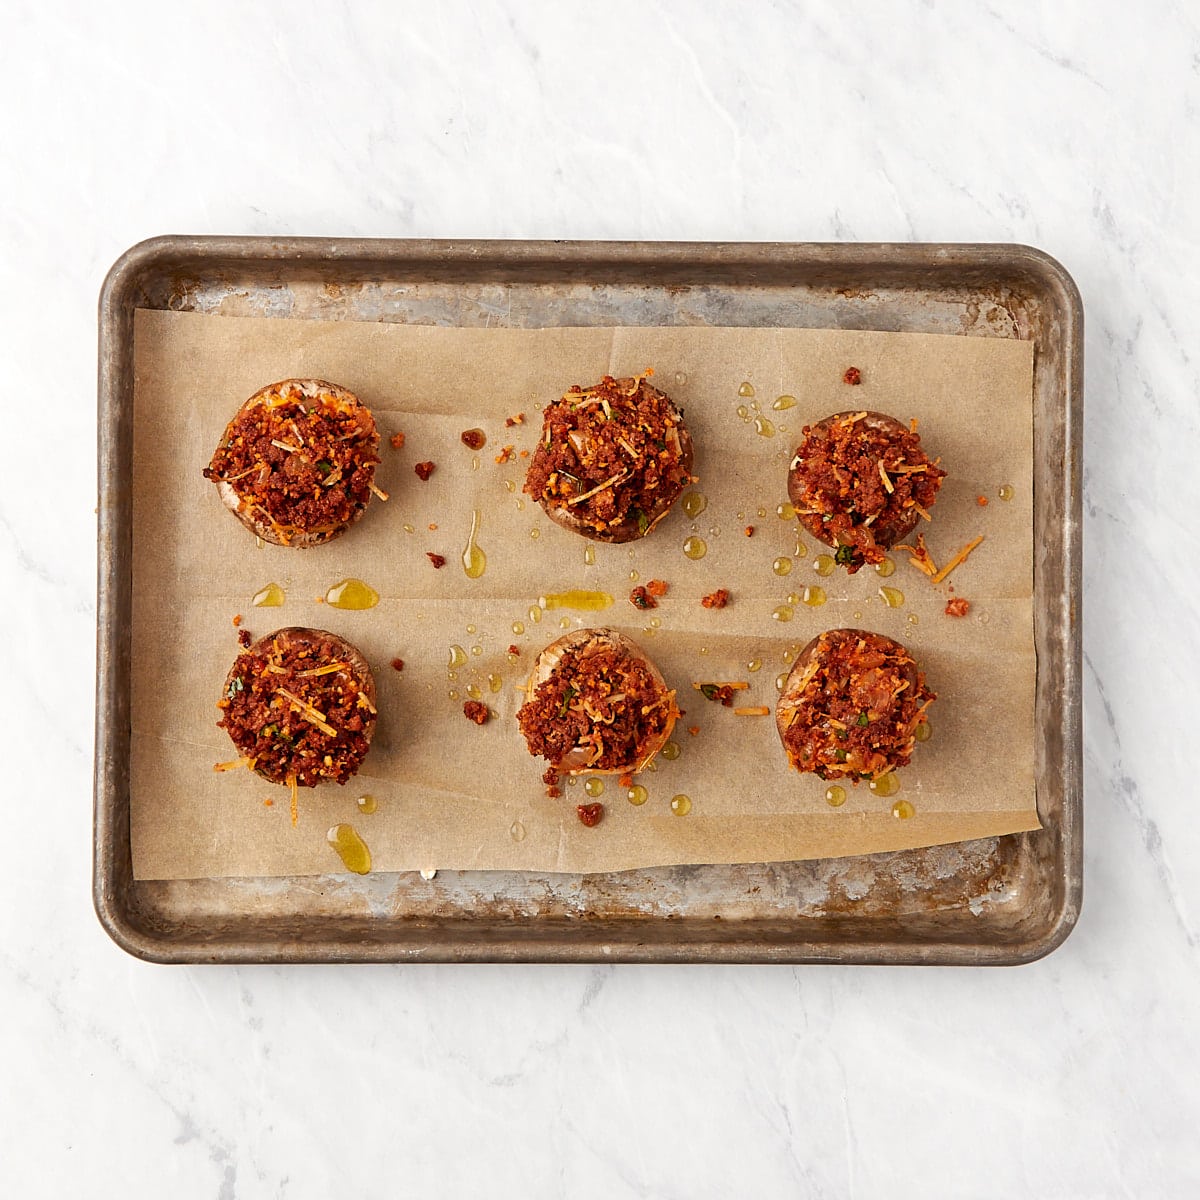 uncooked stuffed mushrooms on a baking sheet lined with parchment paper.